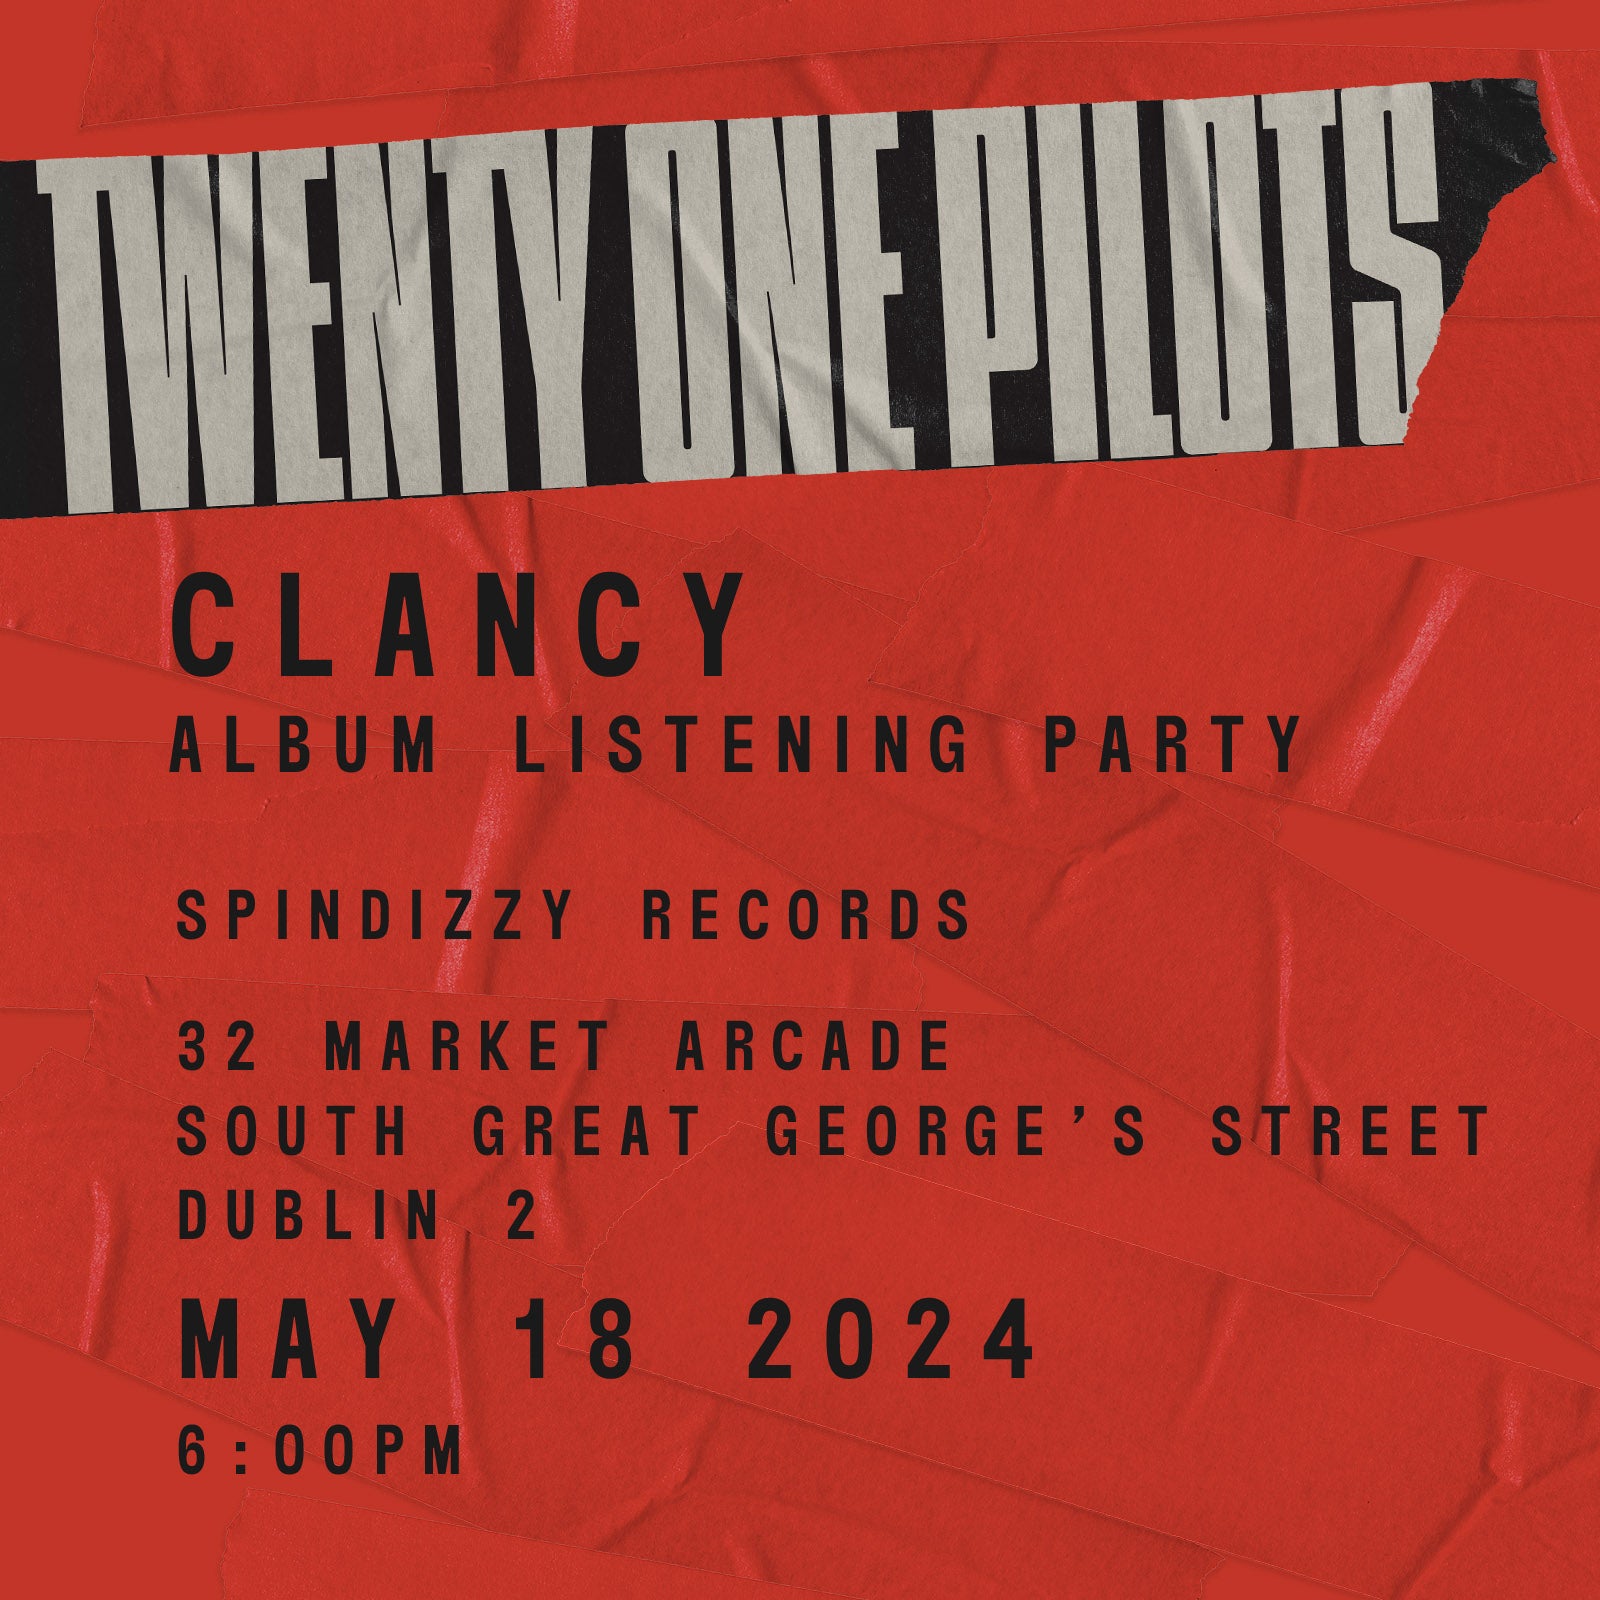 TWENTY ONE PILOTS 'Clancy' - Instore Listening Party - May 18th @ 6pm